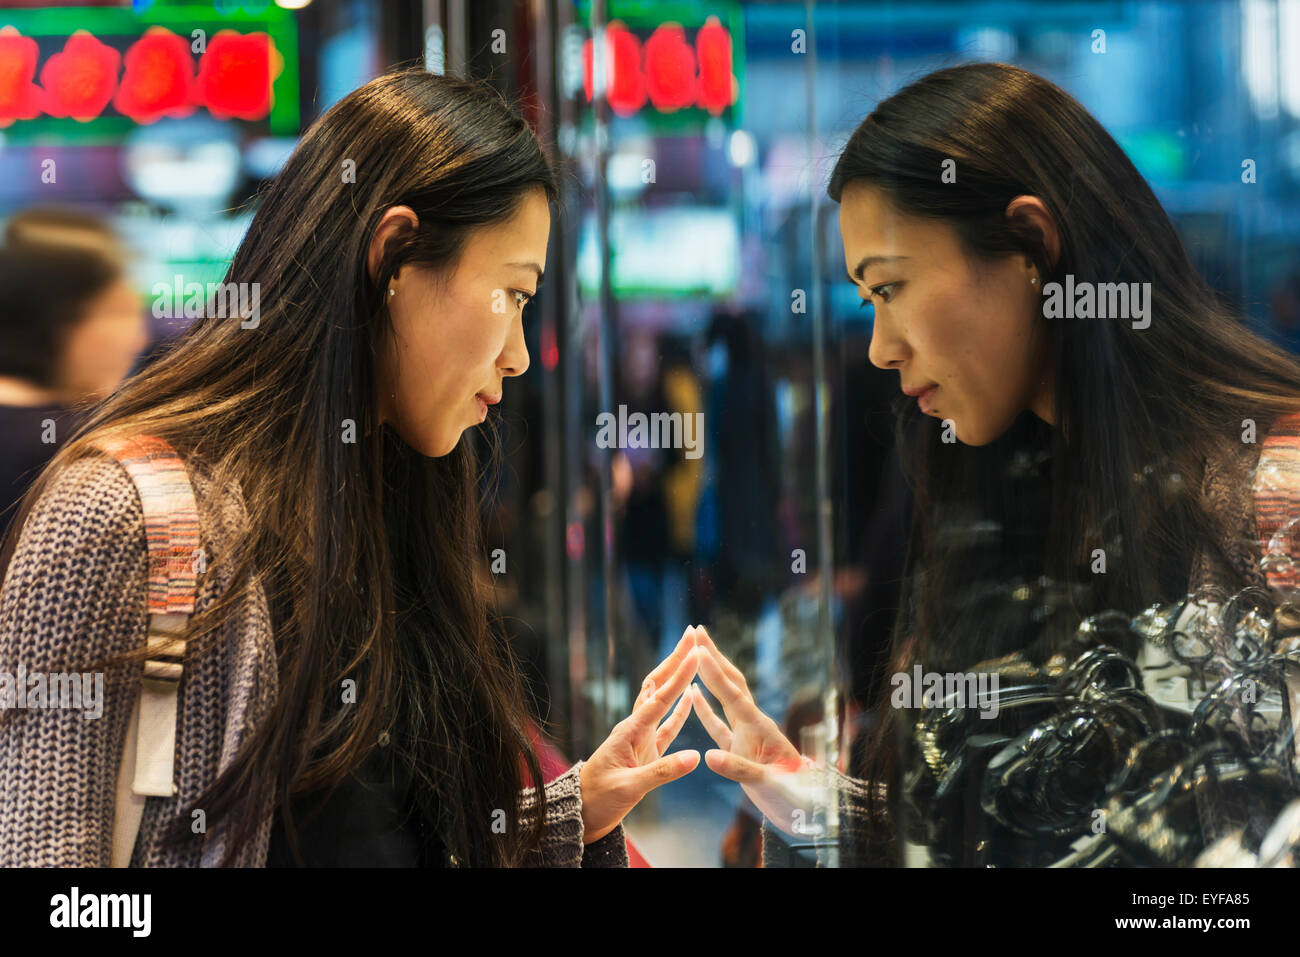 A young woman and her reflection in the glass peering into a shop window, Kowloon; Hong Kong, China Stock Photo